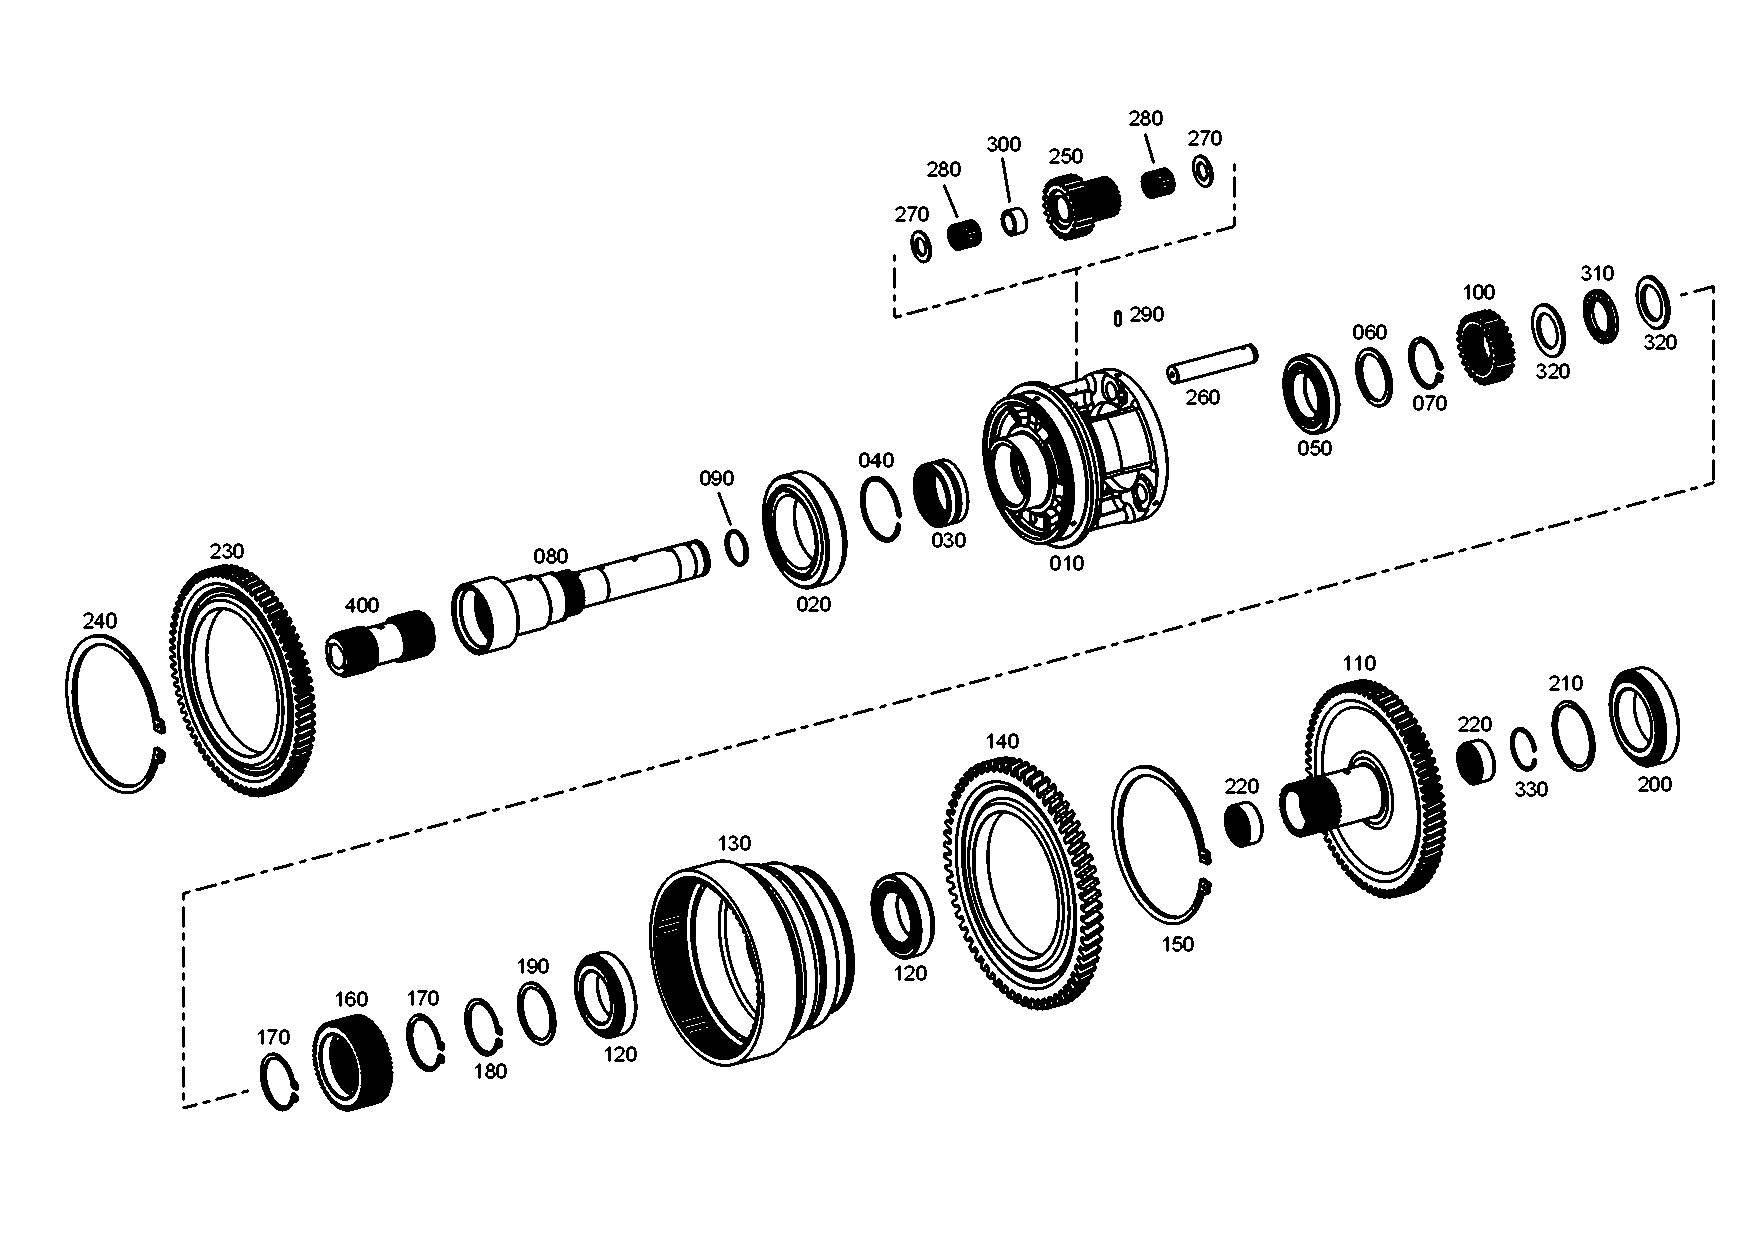 drawing for SDF 04329283 - RETAINING RING (figure 1)